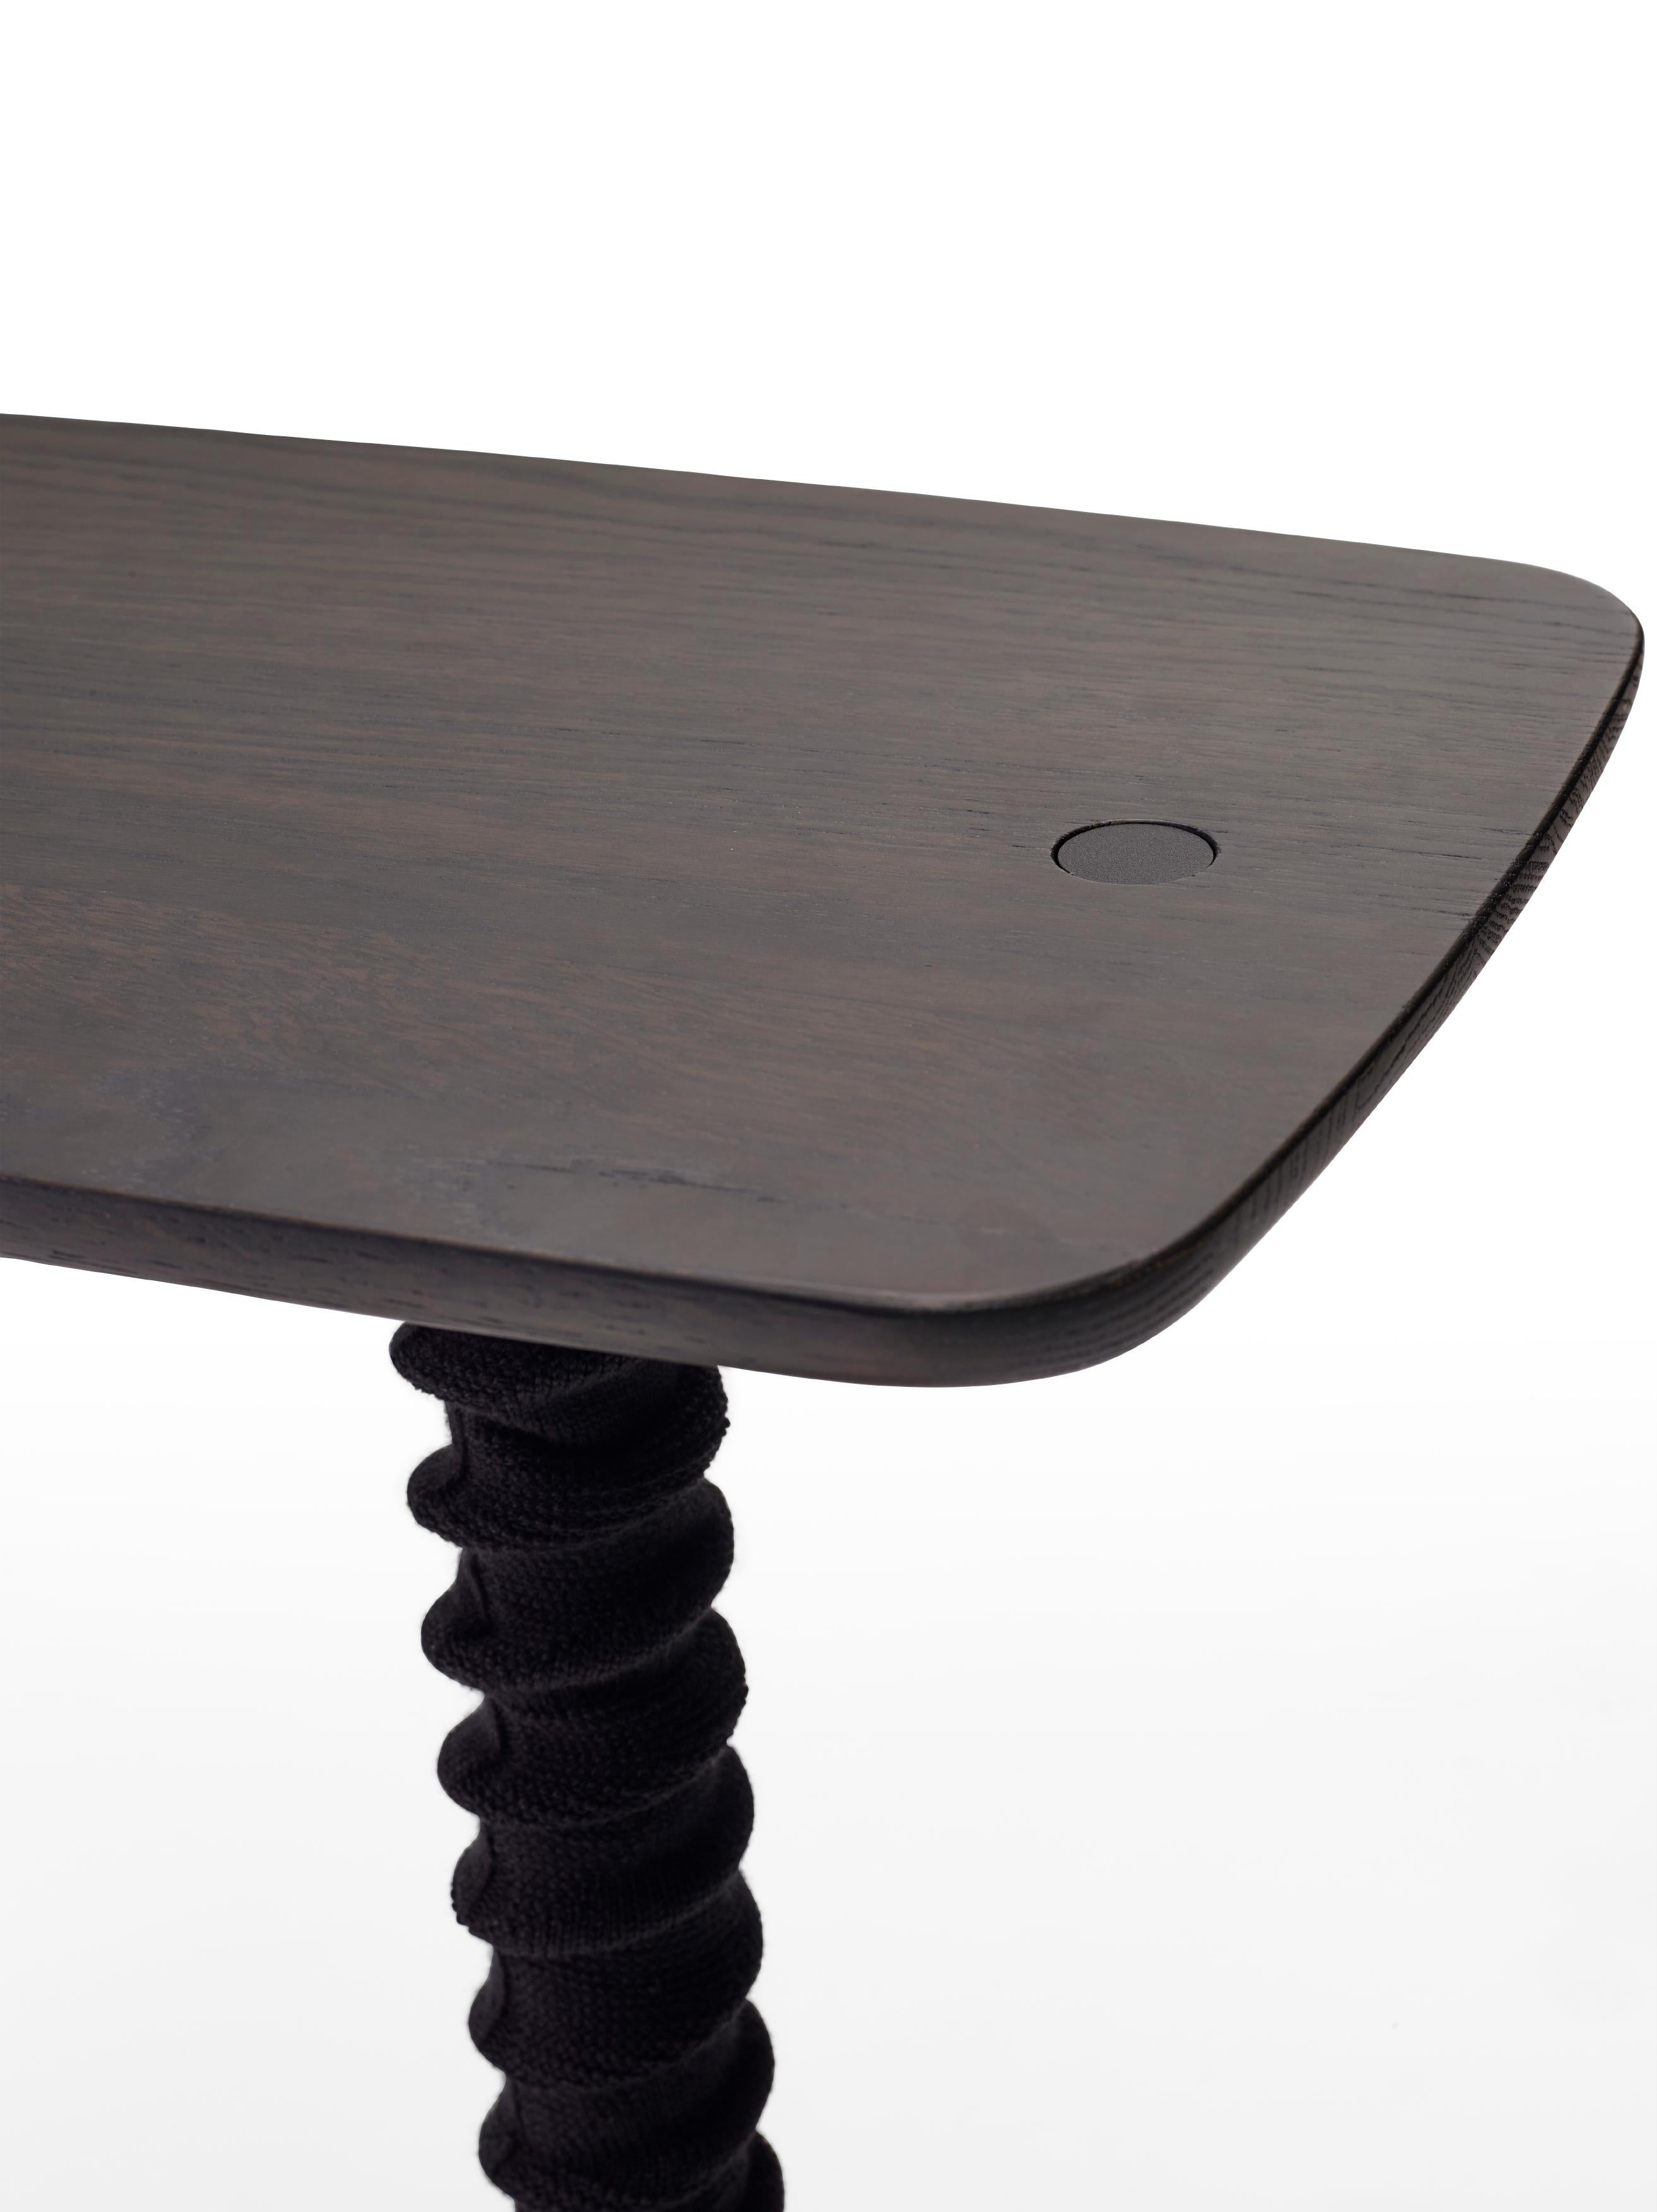 Customizable Utensils Adjustable Side Table by Arco Design Studio In New Condition For Sale In New York, NY